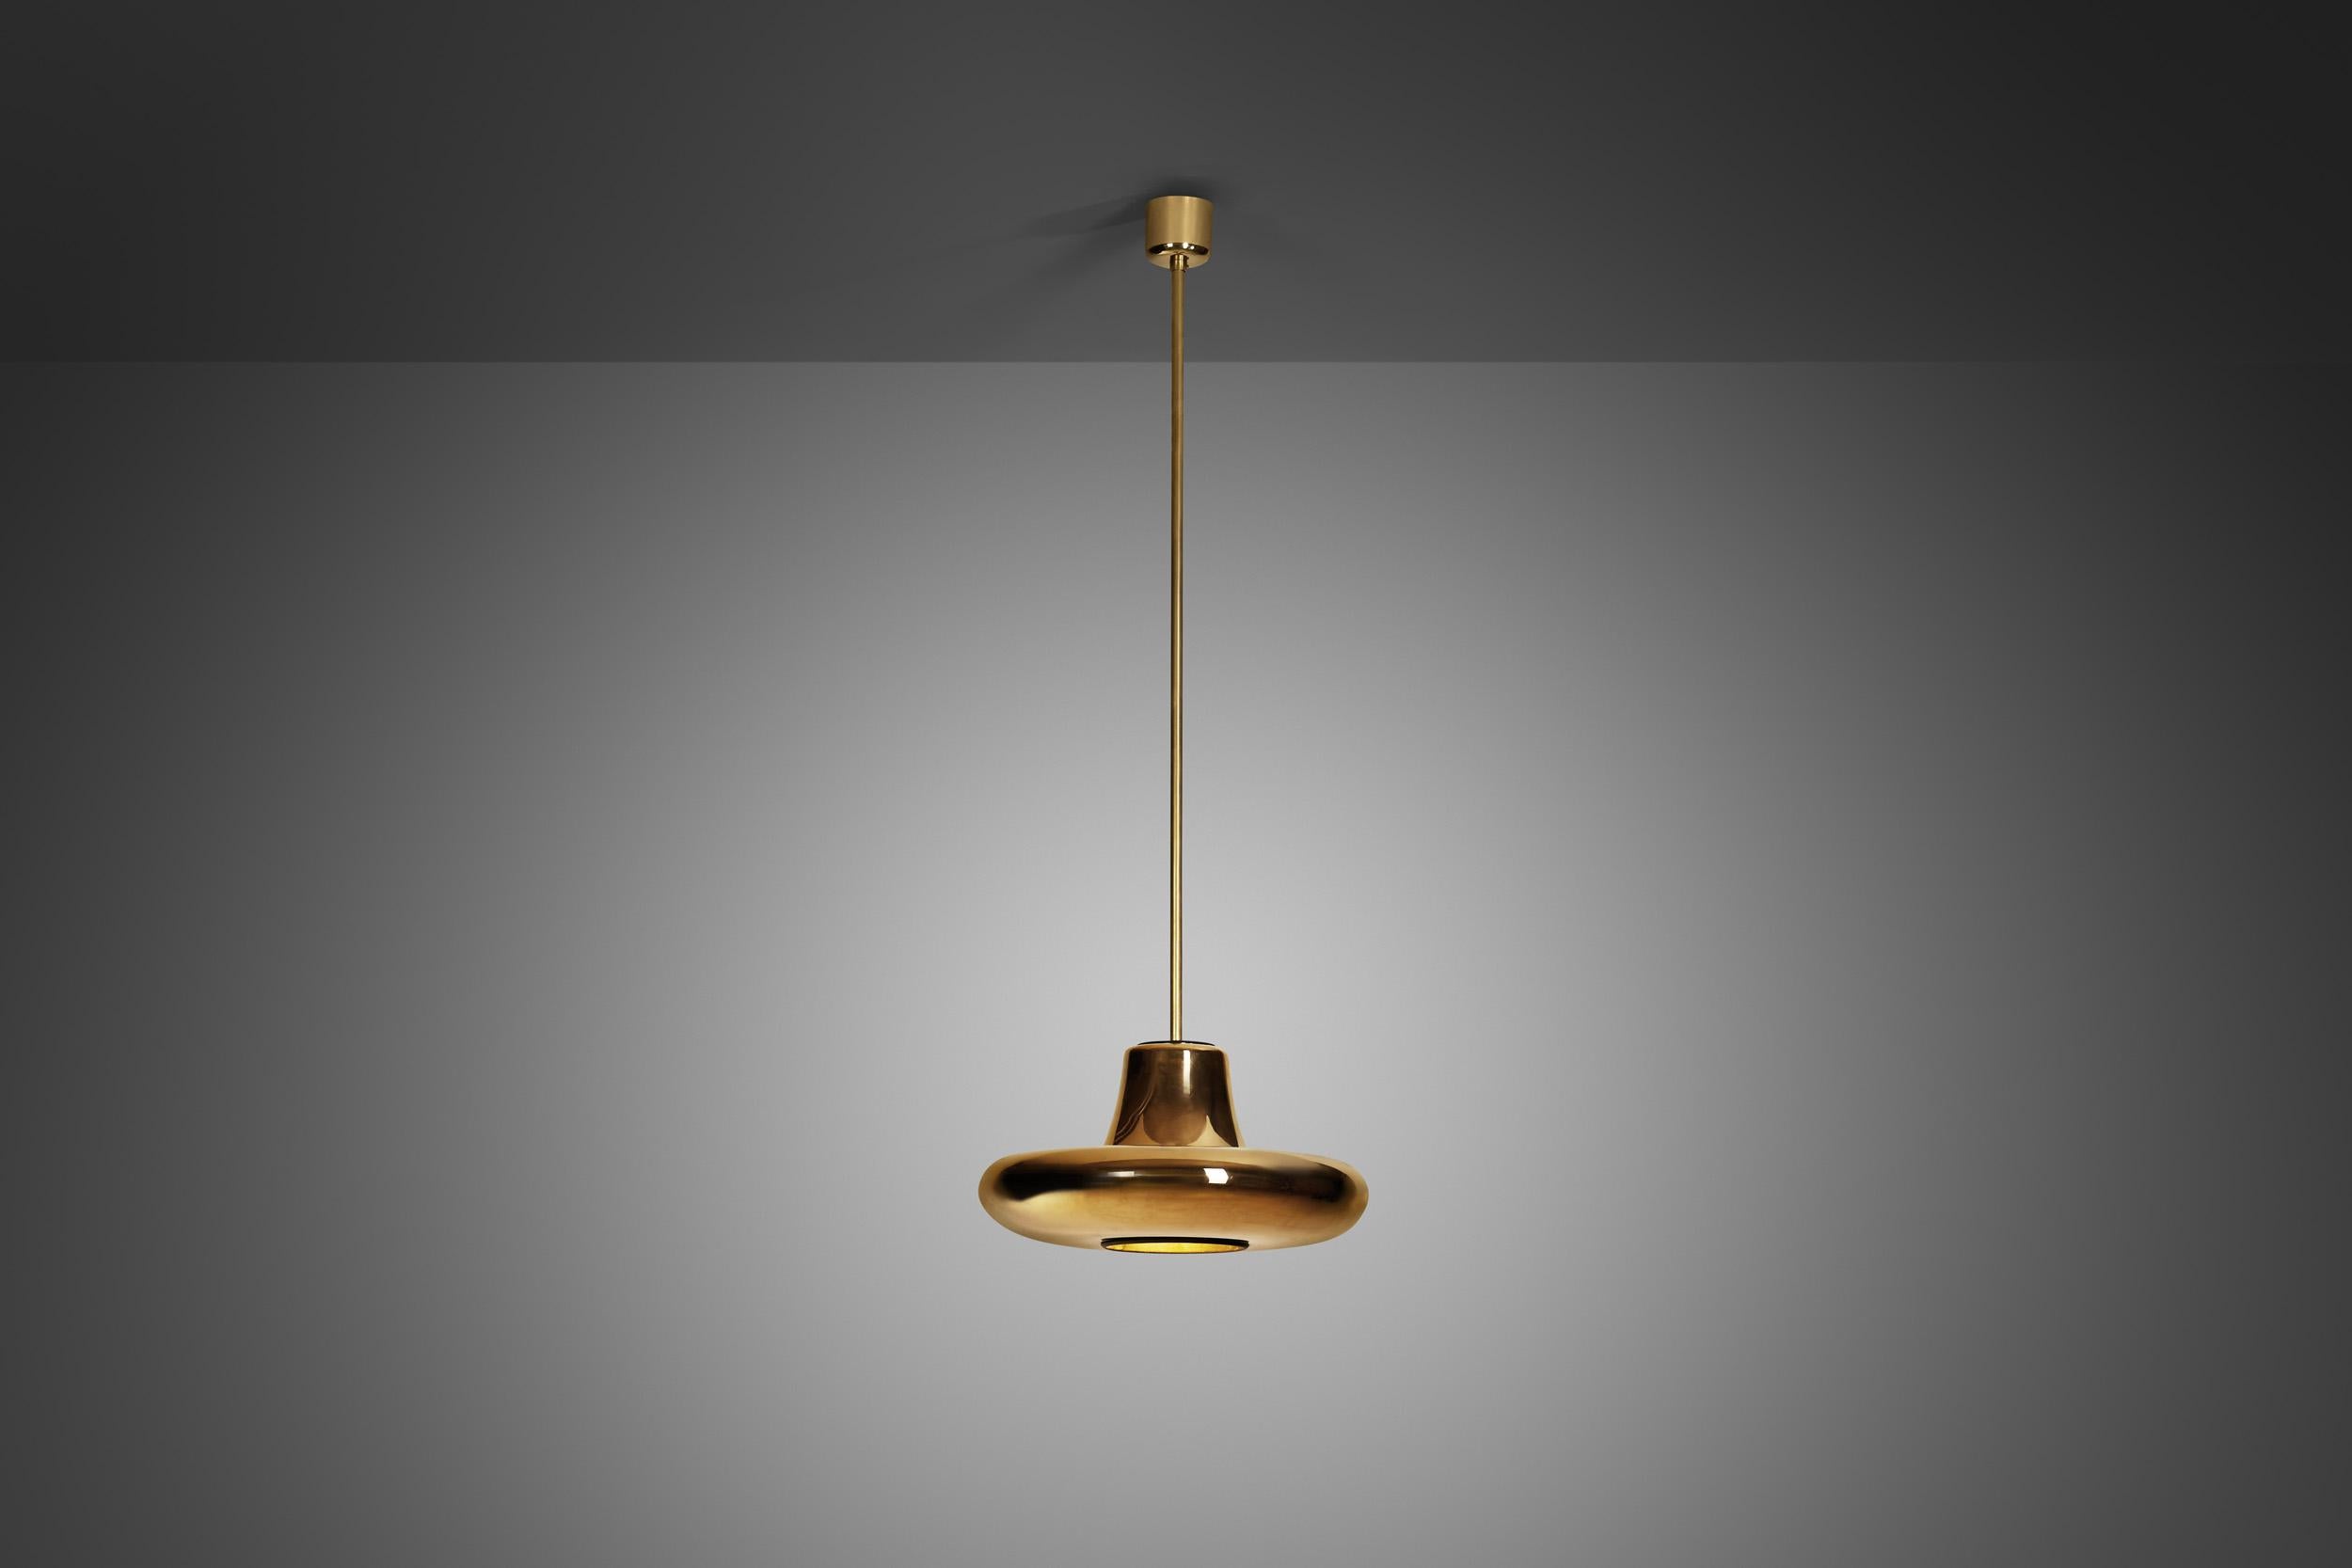 Valto Kokko was a multitalented Finnish designer and artist with a unique design language that translated into every single piece he created, exemplified by this rare futuristic gold-plated pendant lamp.

The 20th century, especially the second